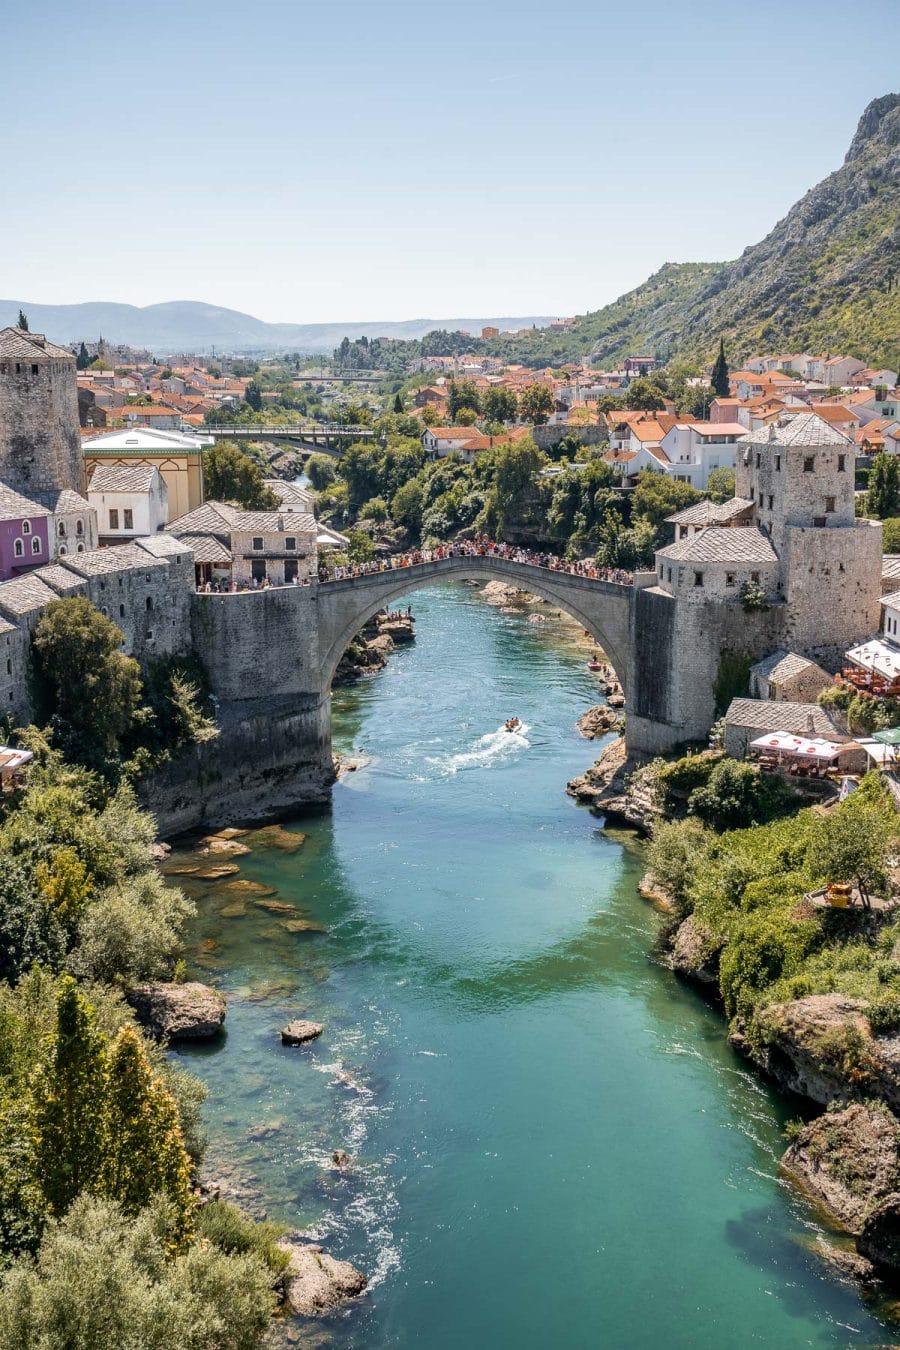 View of the Stari Most (Old Bridge) and the city of Mostar in Bosnia-Herzegovina